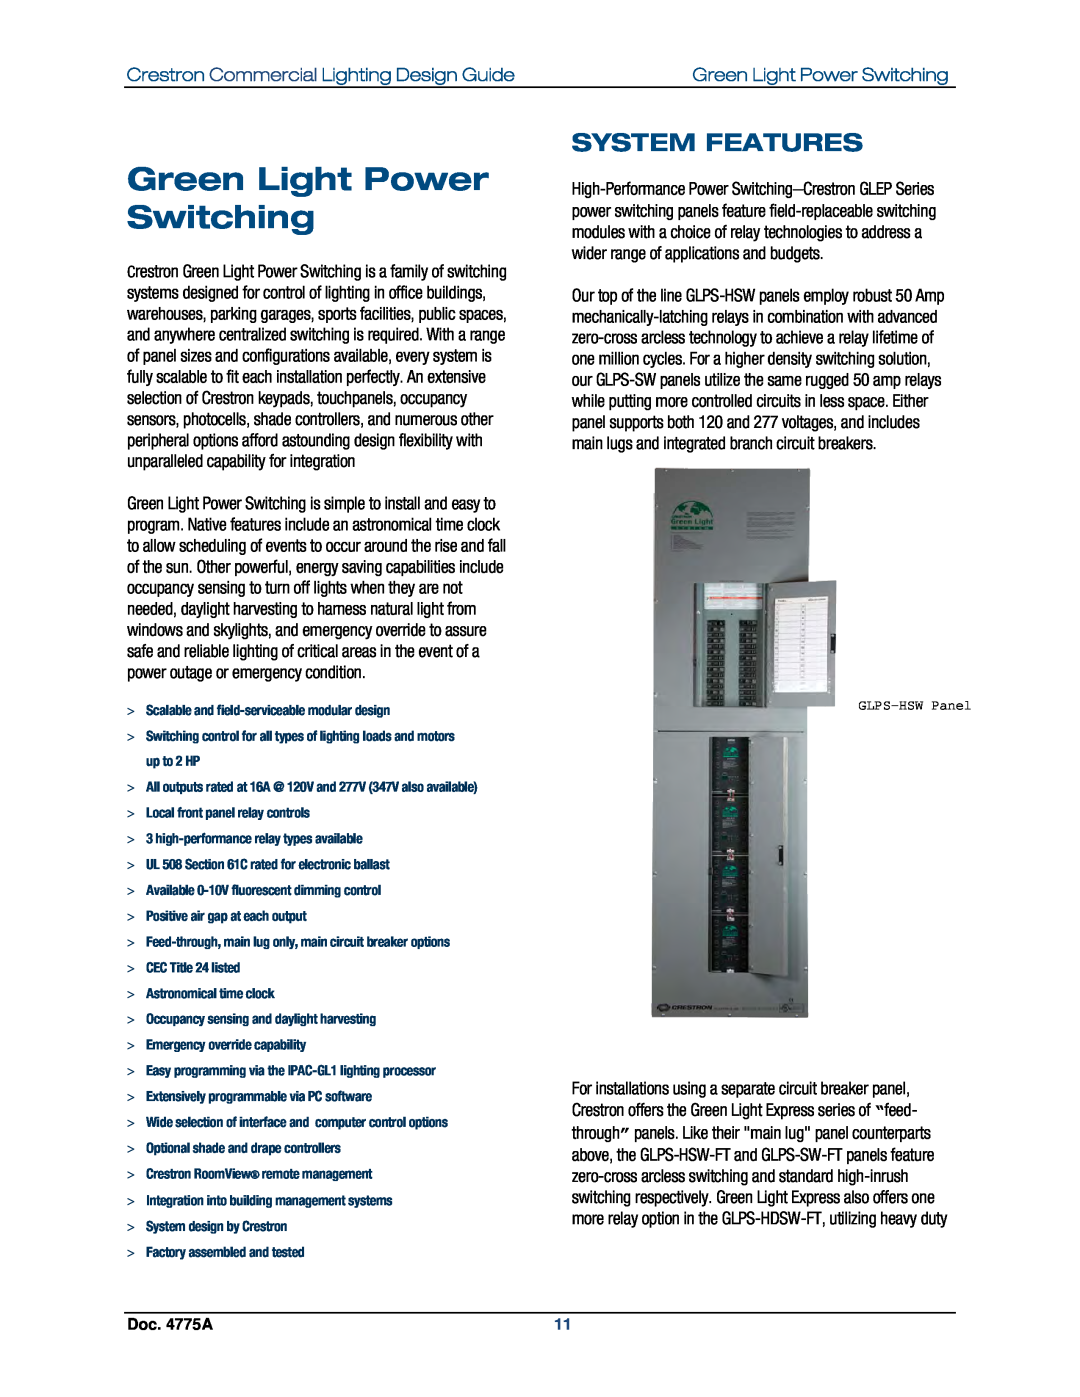 Crestron electronic GLPS-HSW manual Green Light Power Switching, System Features, Crestron Commercial Lighting Design Guide 